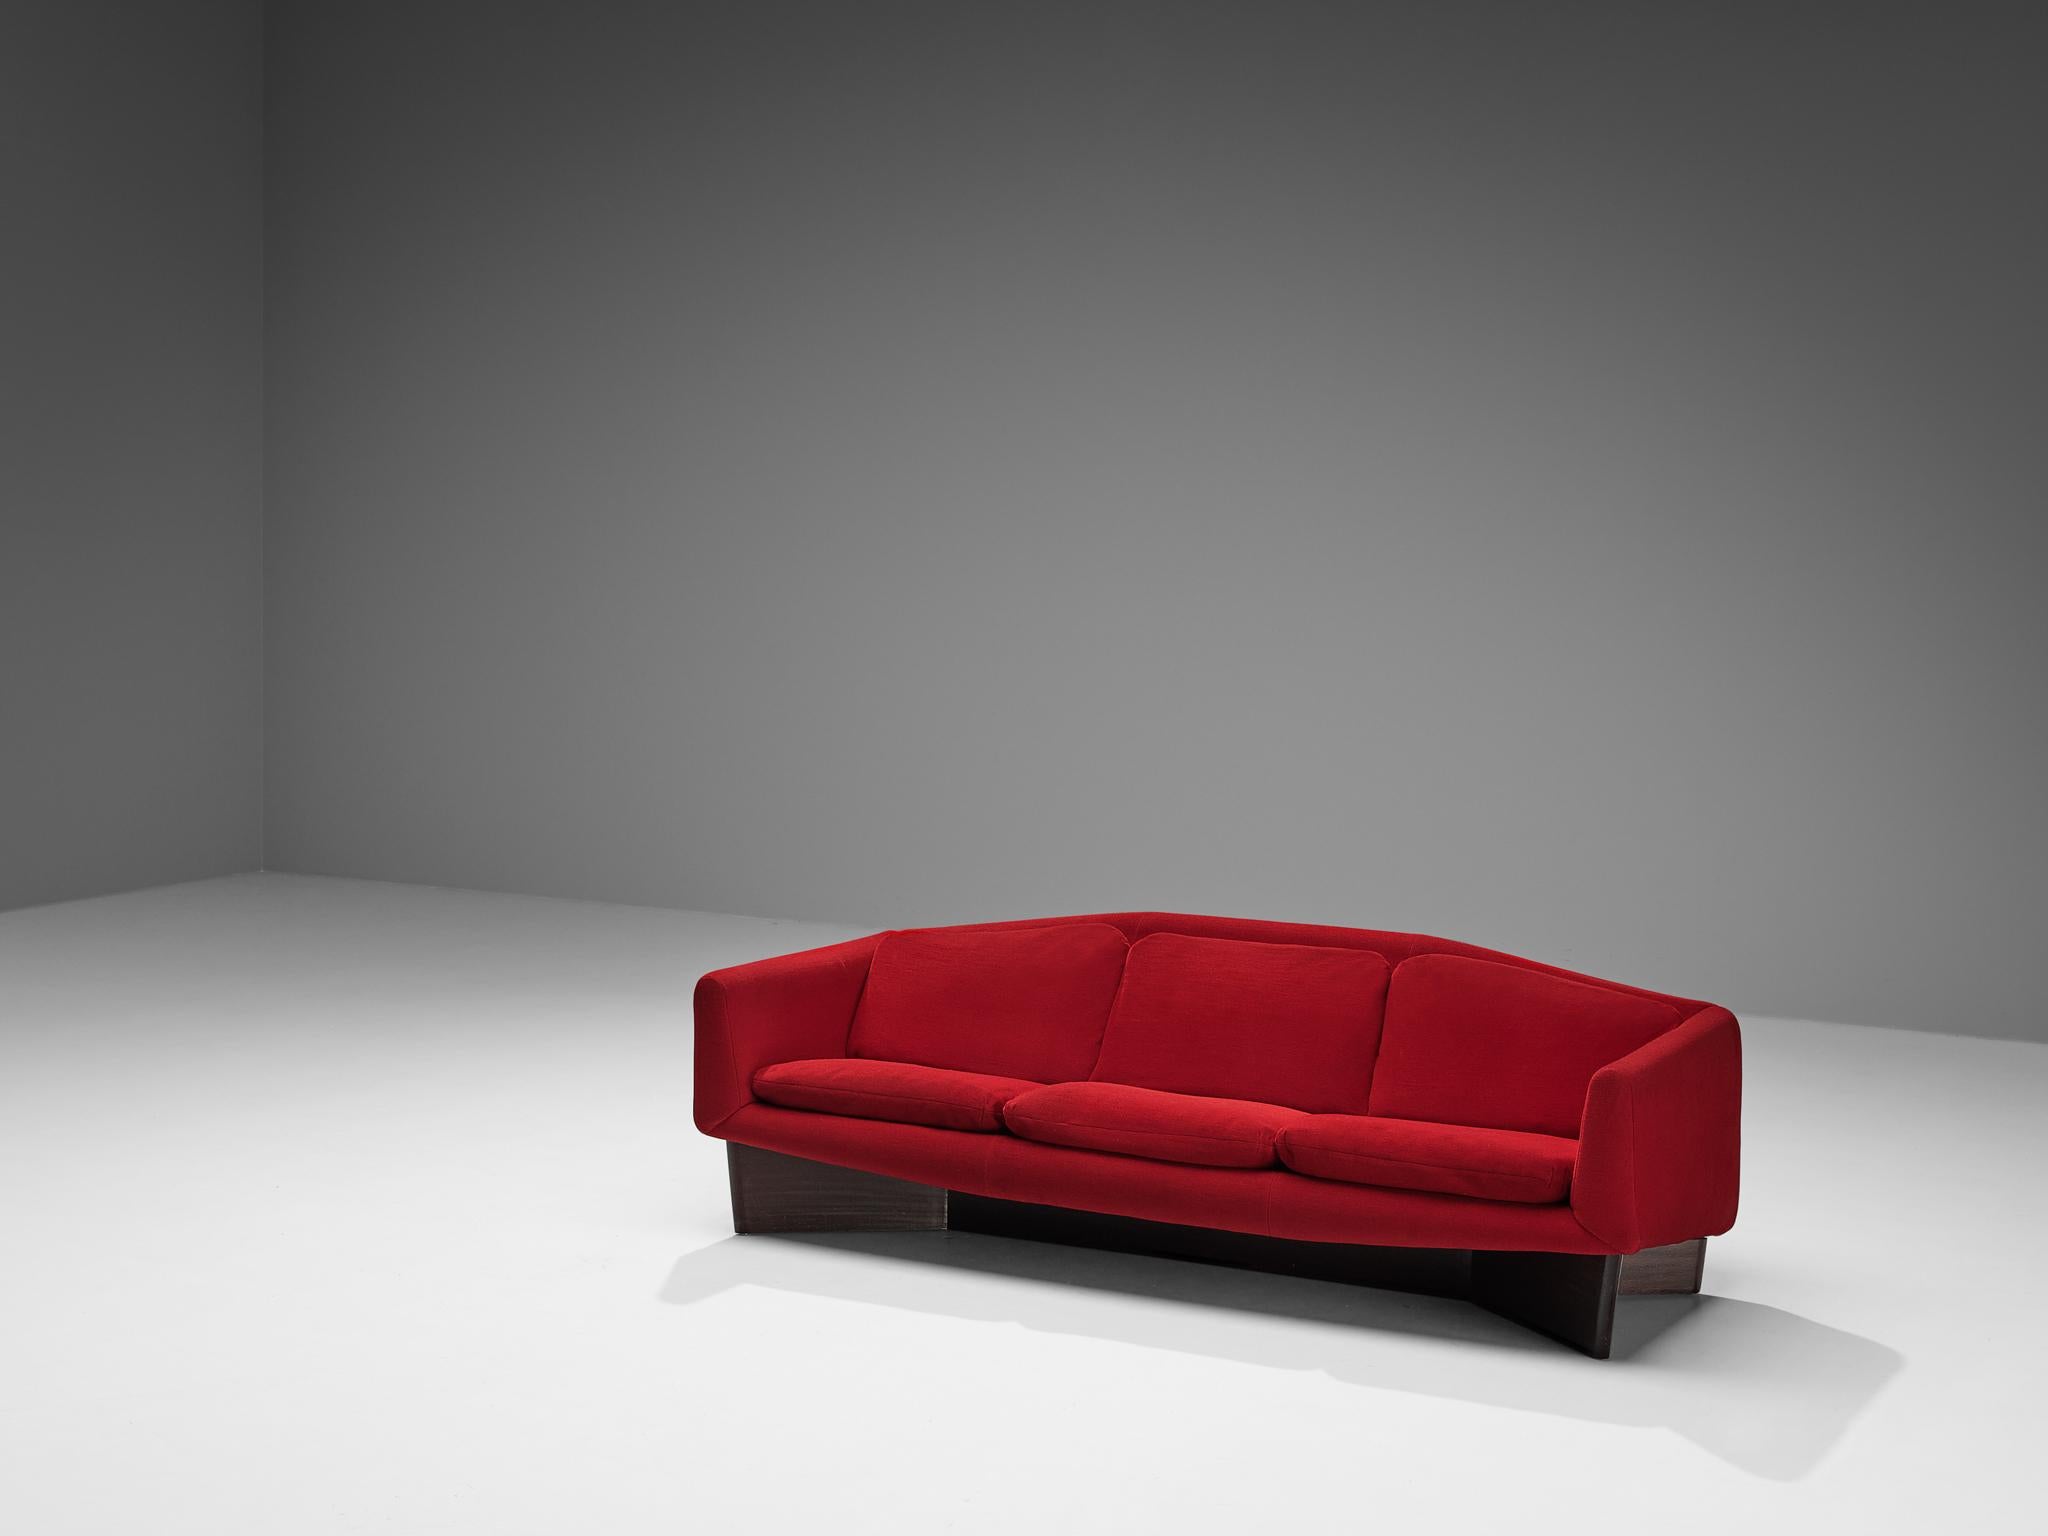 Pierre Guariche for Burov, 'Monaco' sofa, velvet, stained mahogany, France, circa 1960

Pierre Guariche (1926-1995), a multi-talented French designer, interior decorator, and architect left an indelible mark on the world of design. His notable